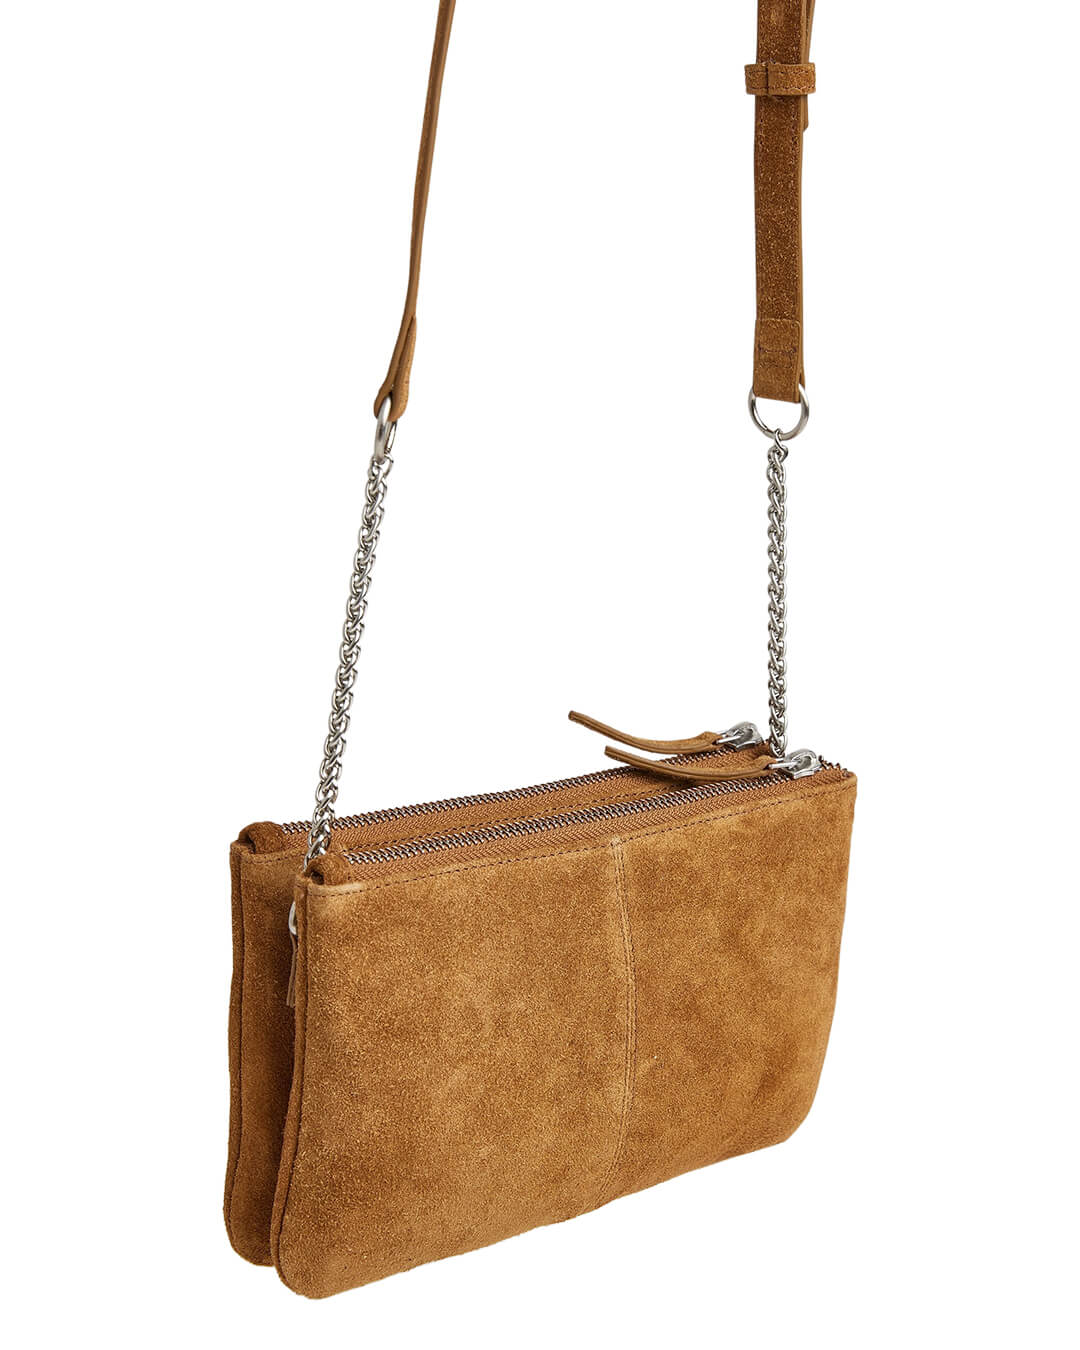 Pepe Jeans Bags ONE Pepe Jeans Astrid Angie Beige Bag